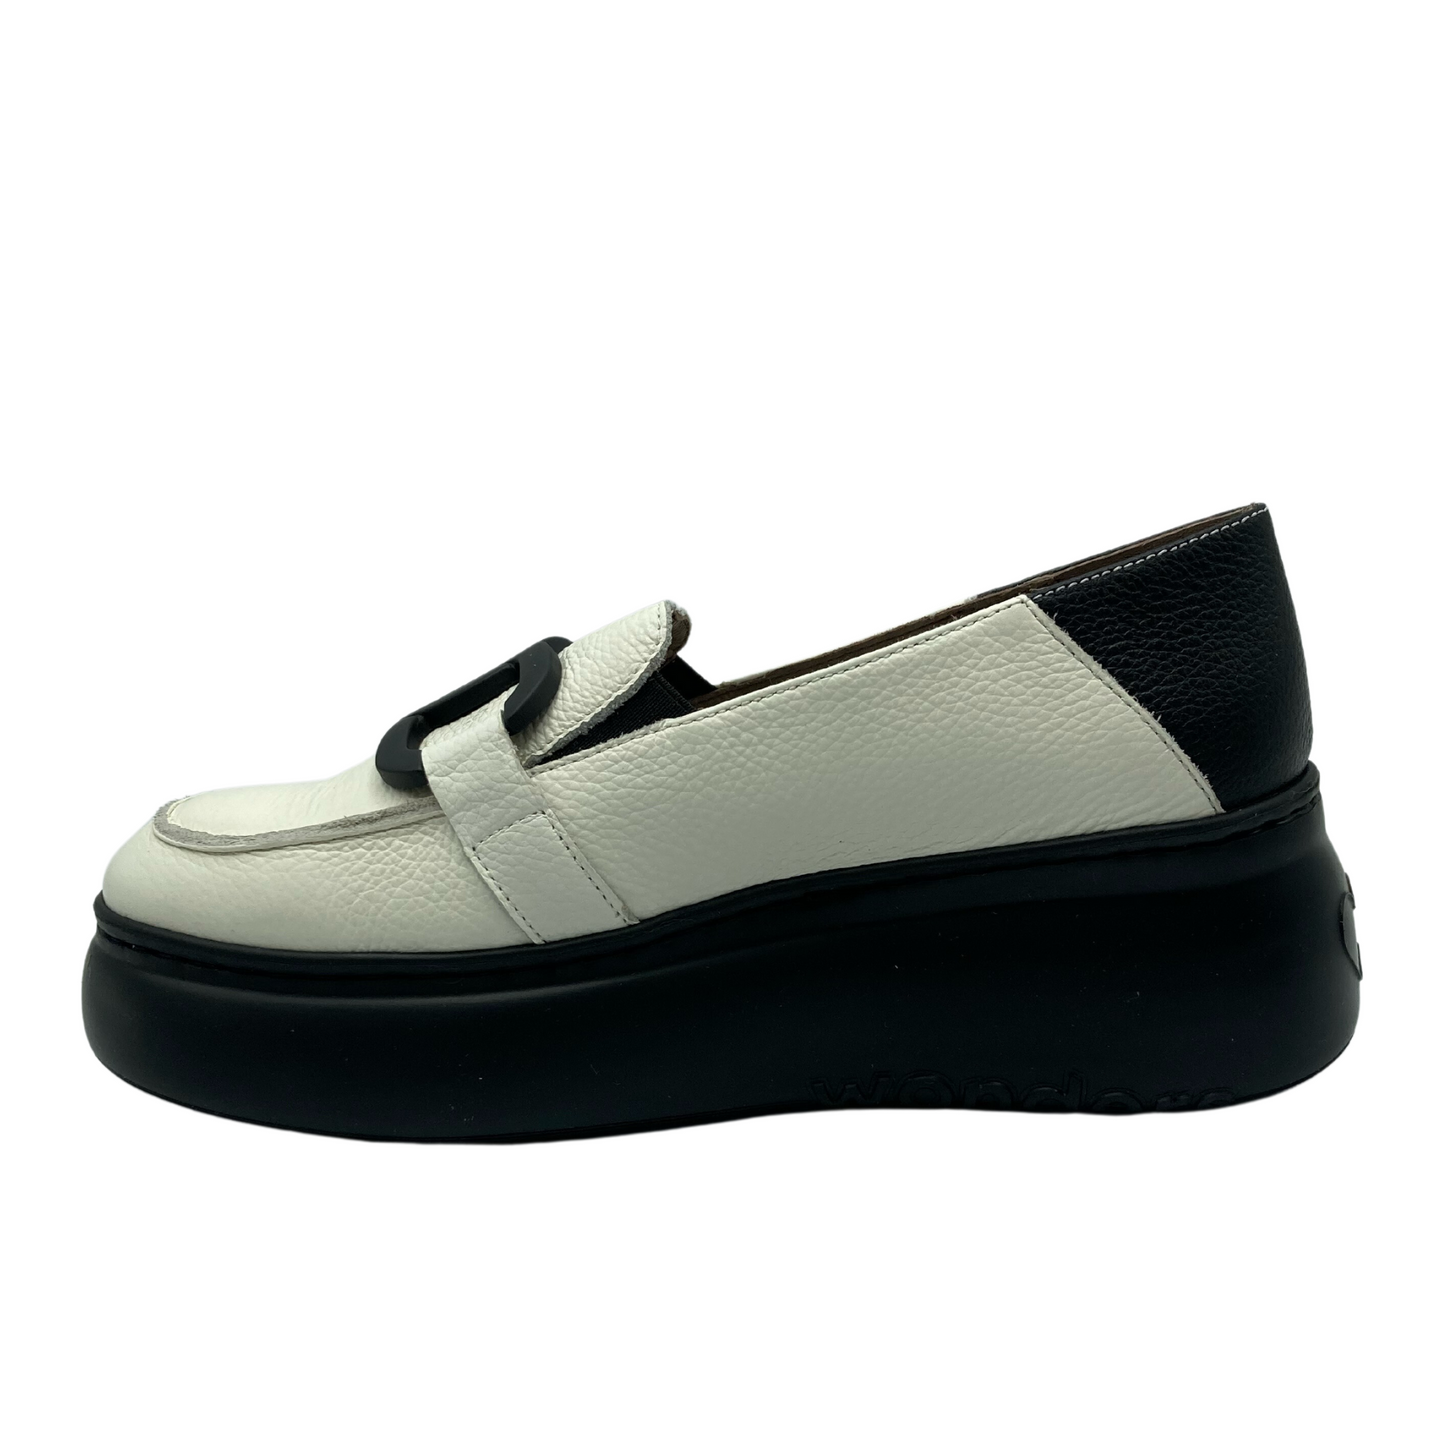 Left facing view of platform loafer with white leather and black rubber sole